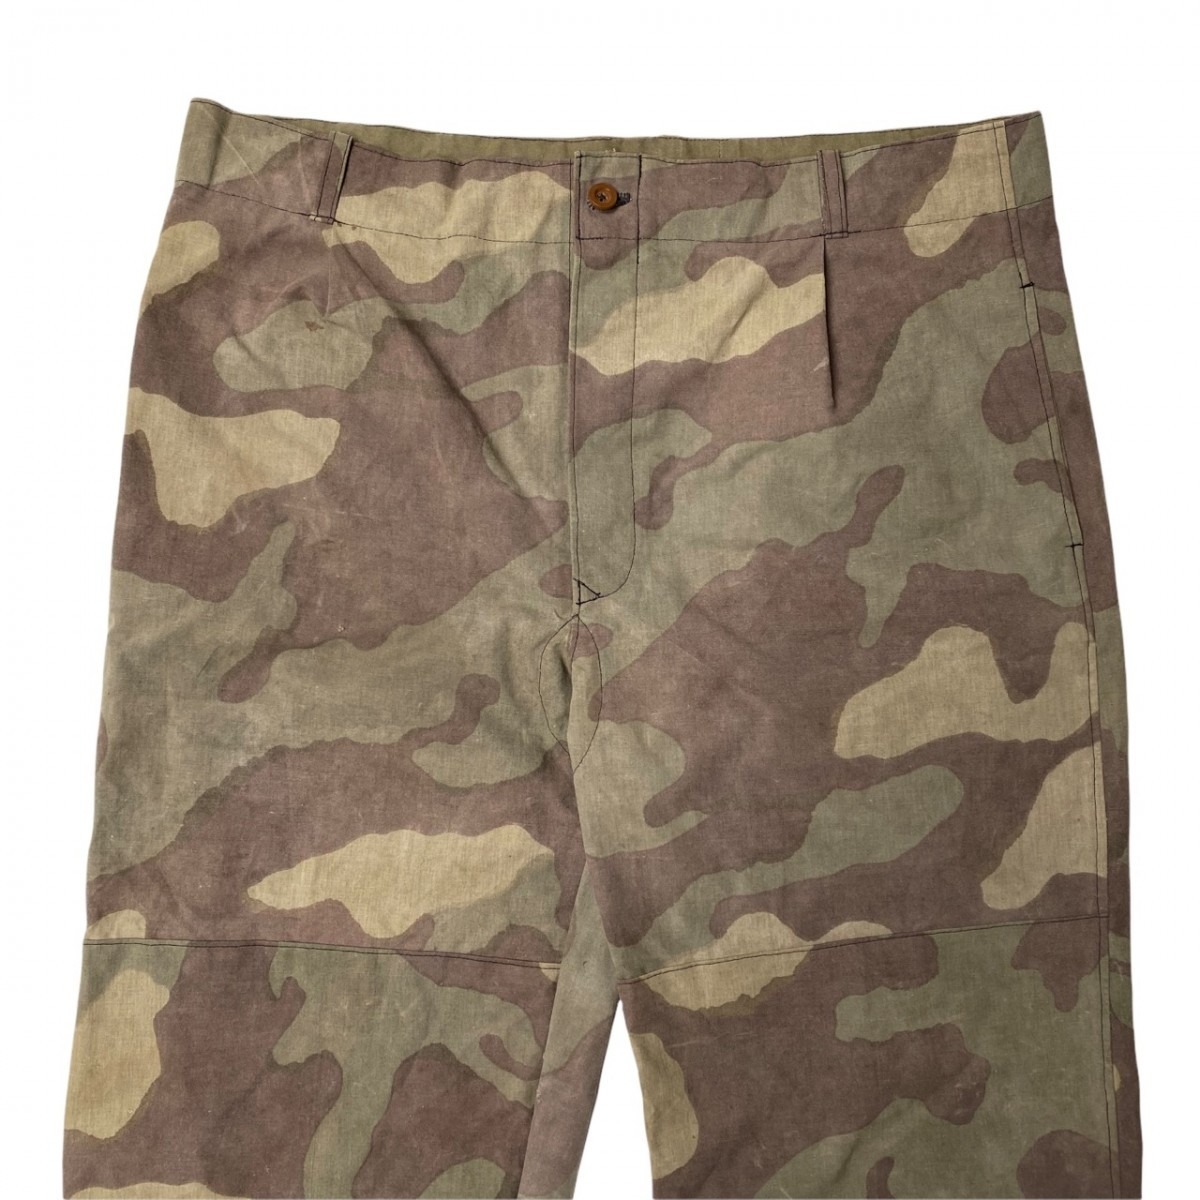 Original WWII German WH/Waffen-SS field made camouflage trousers ...